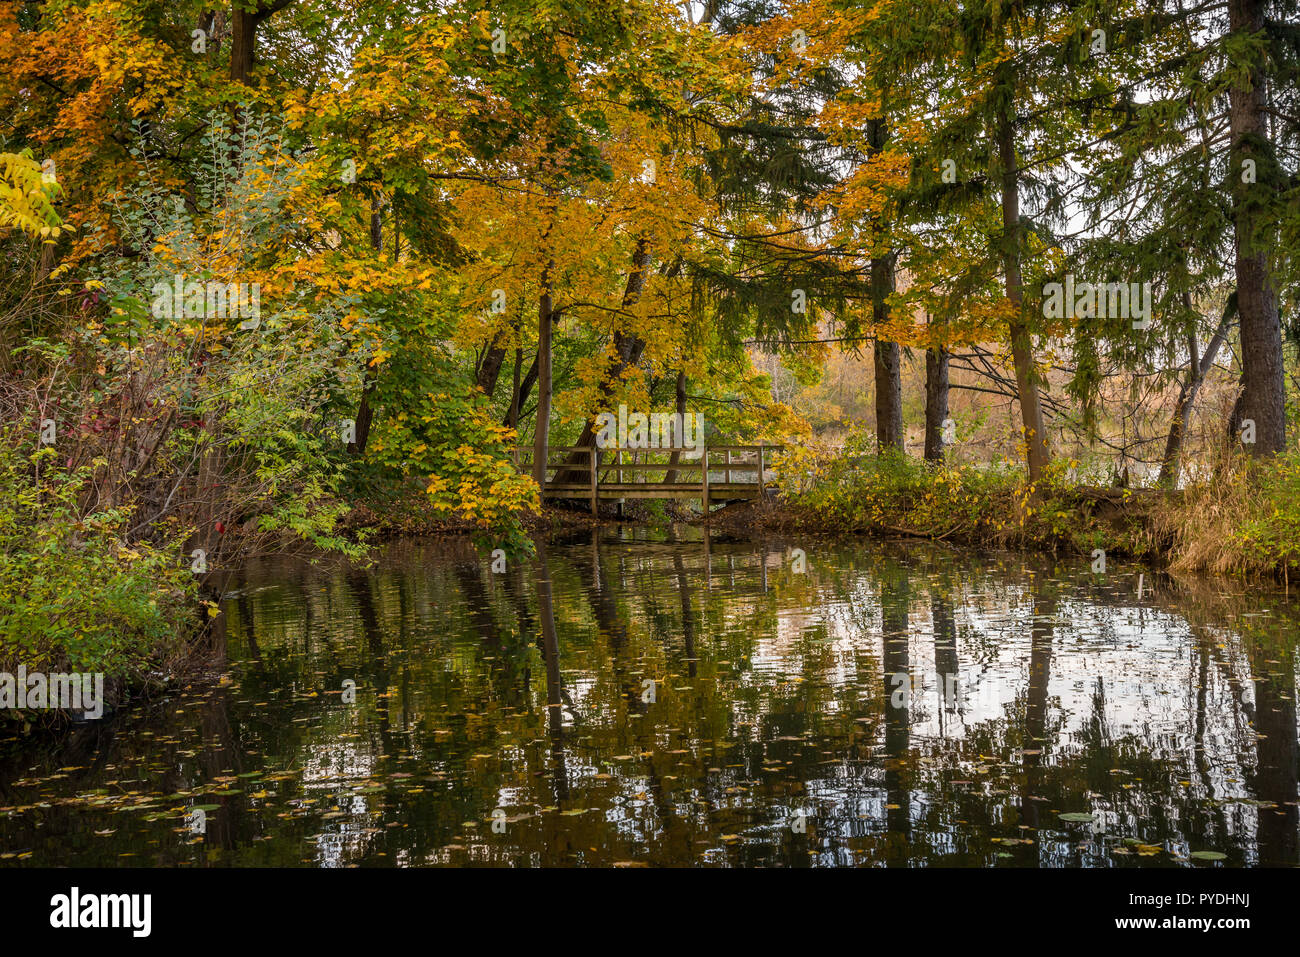 Pond in the autumn park with trees reflected in it Stock Photo